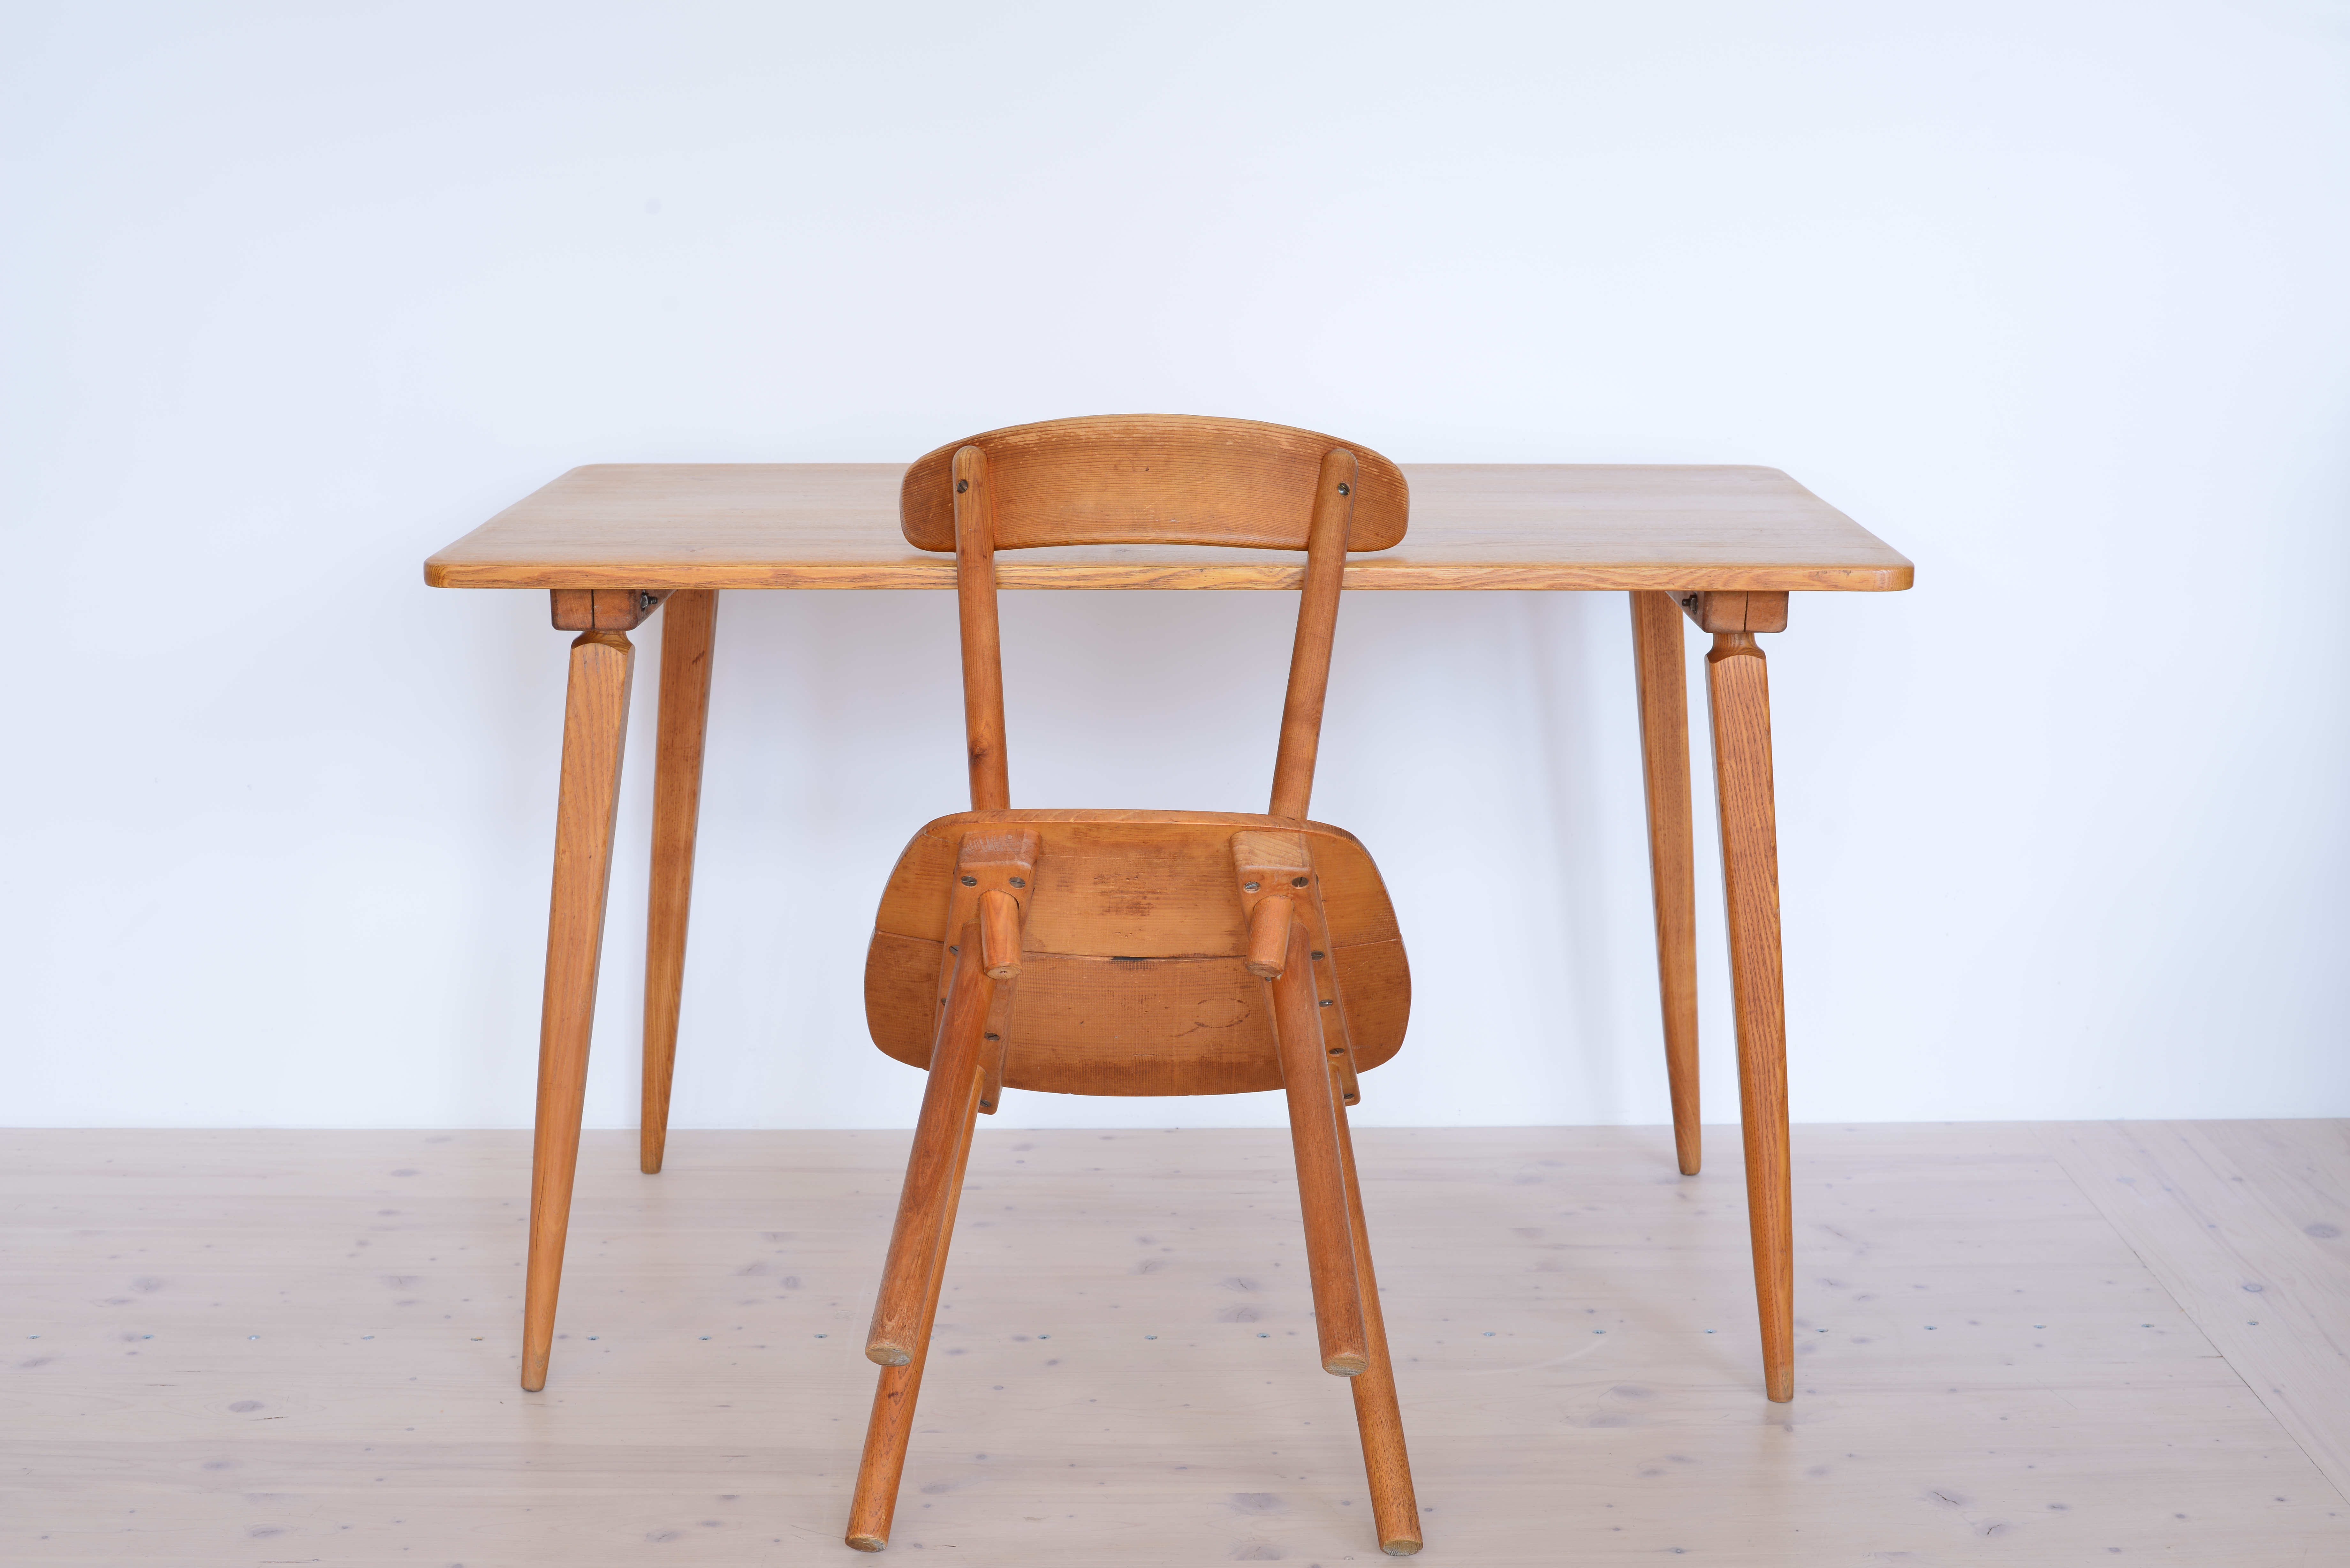 Jacob Muller Ash Dining Table with Chair heyday möbel Zürich